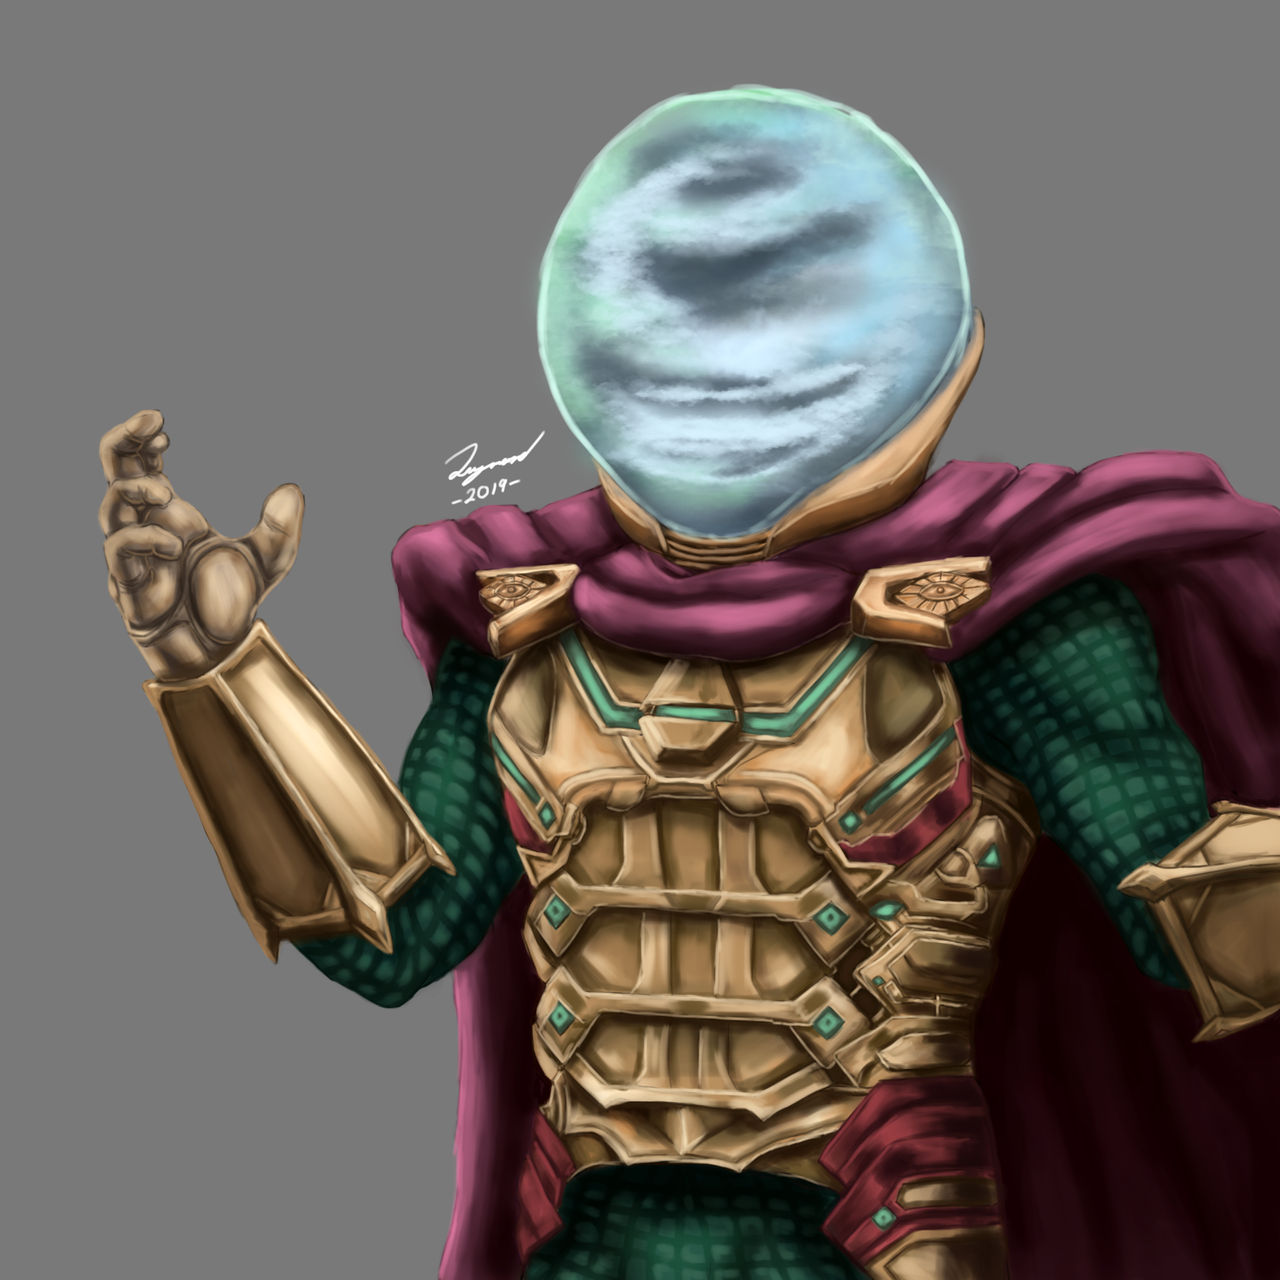 How to Draw Mysterio